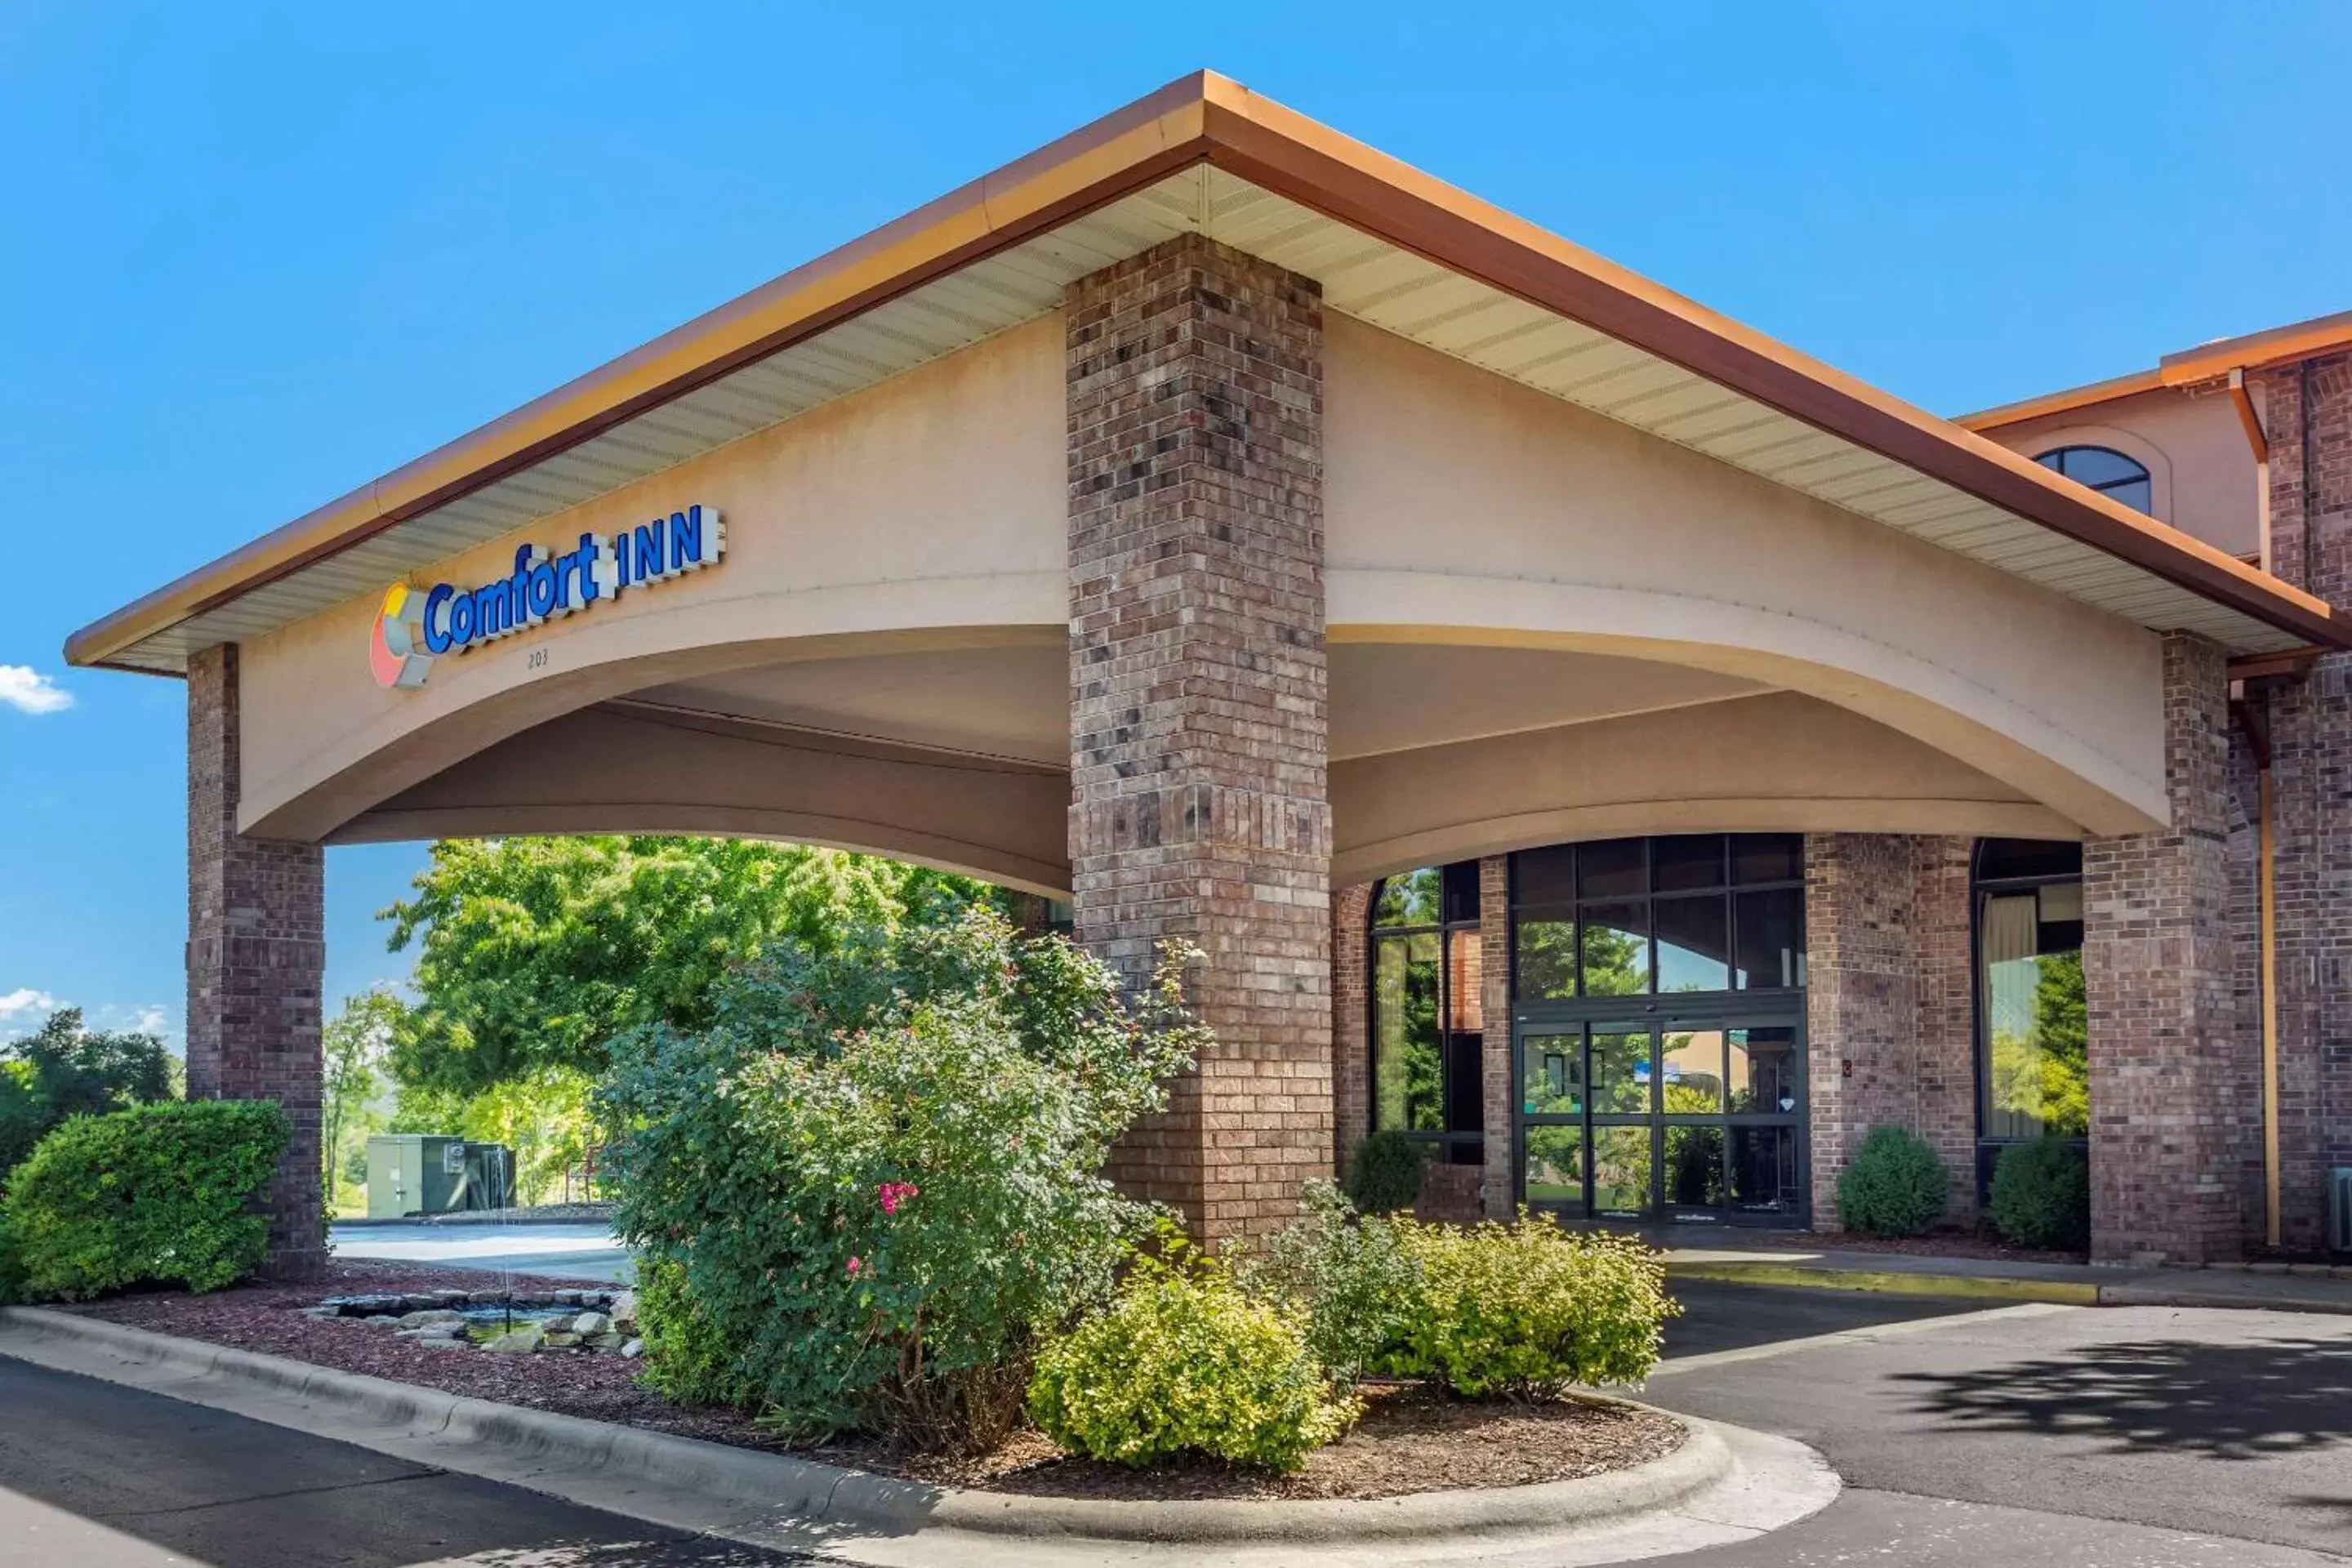 Property Building in Comfort Inn at Thousand Hills